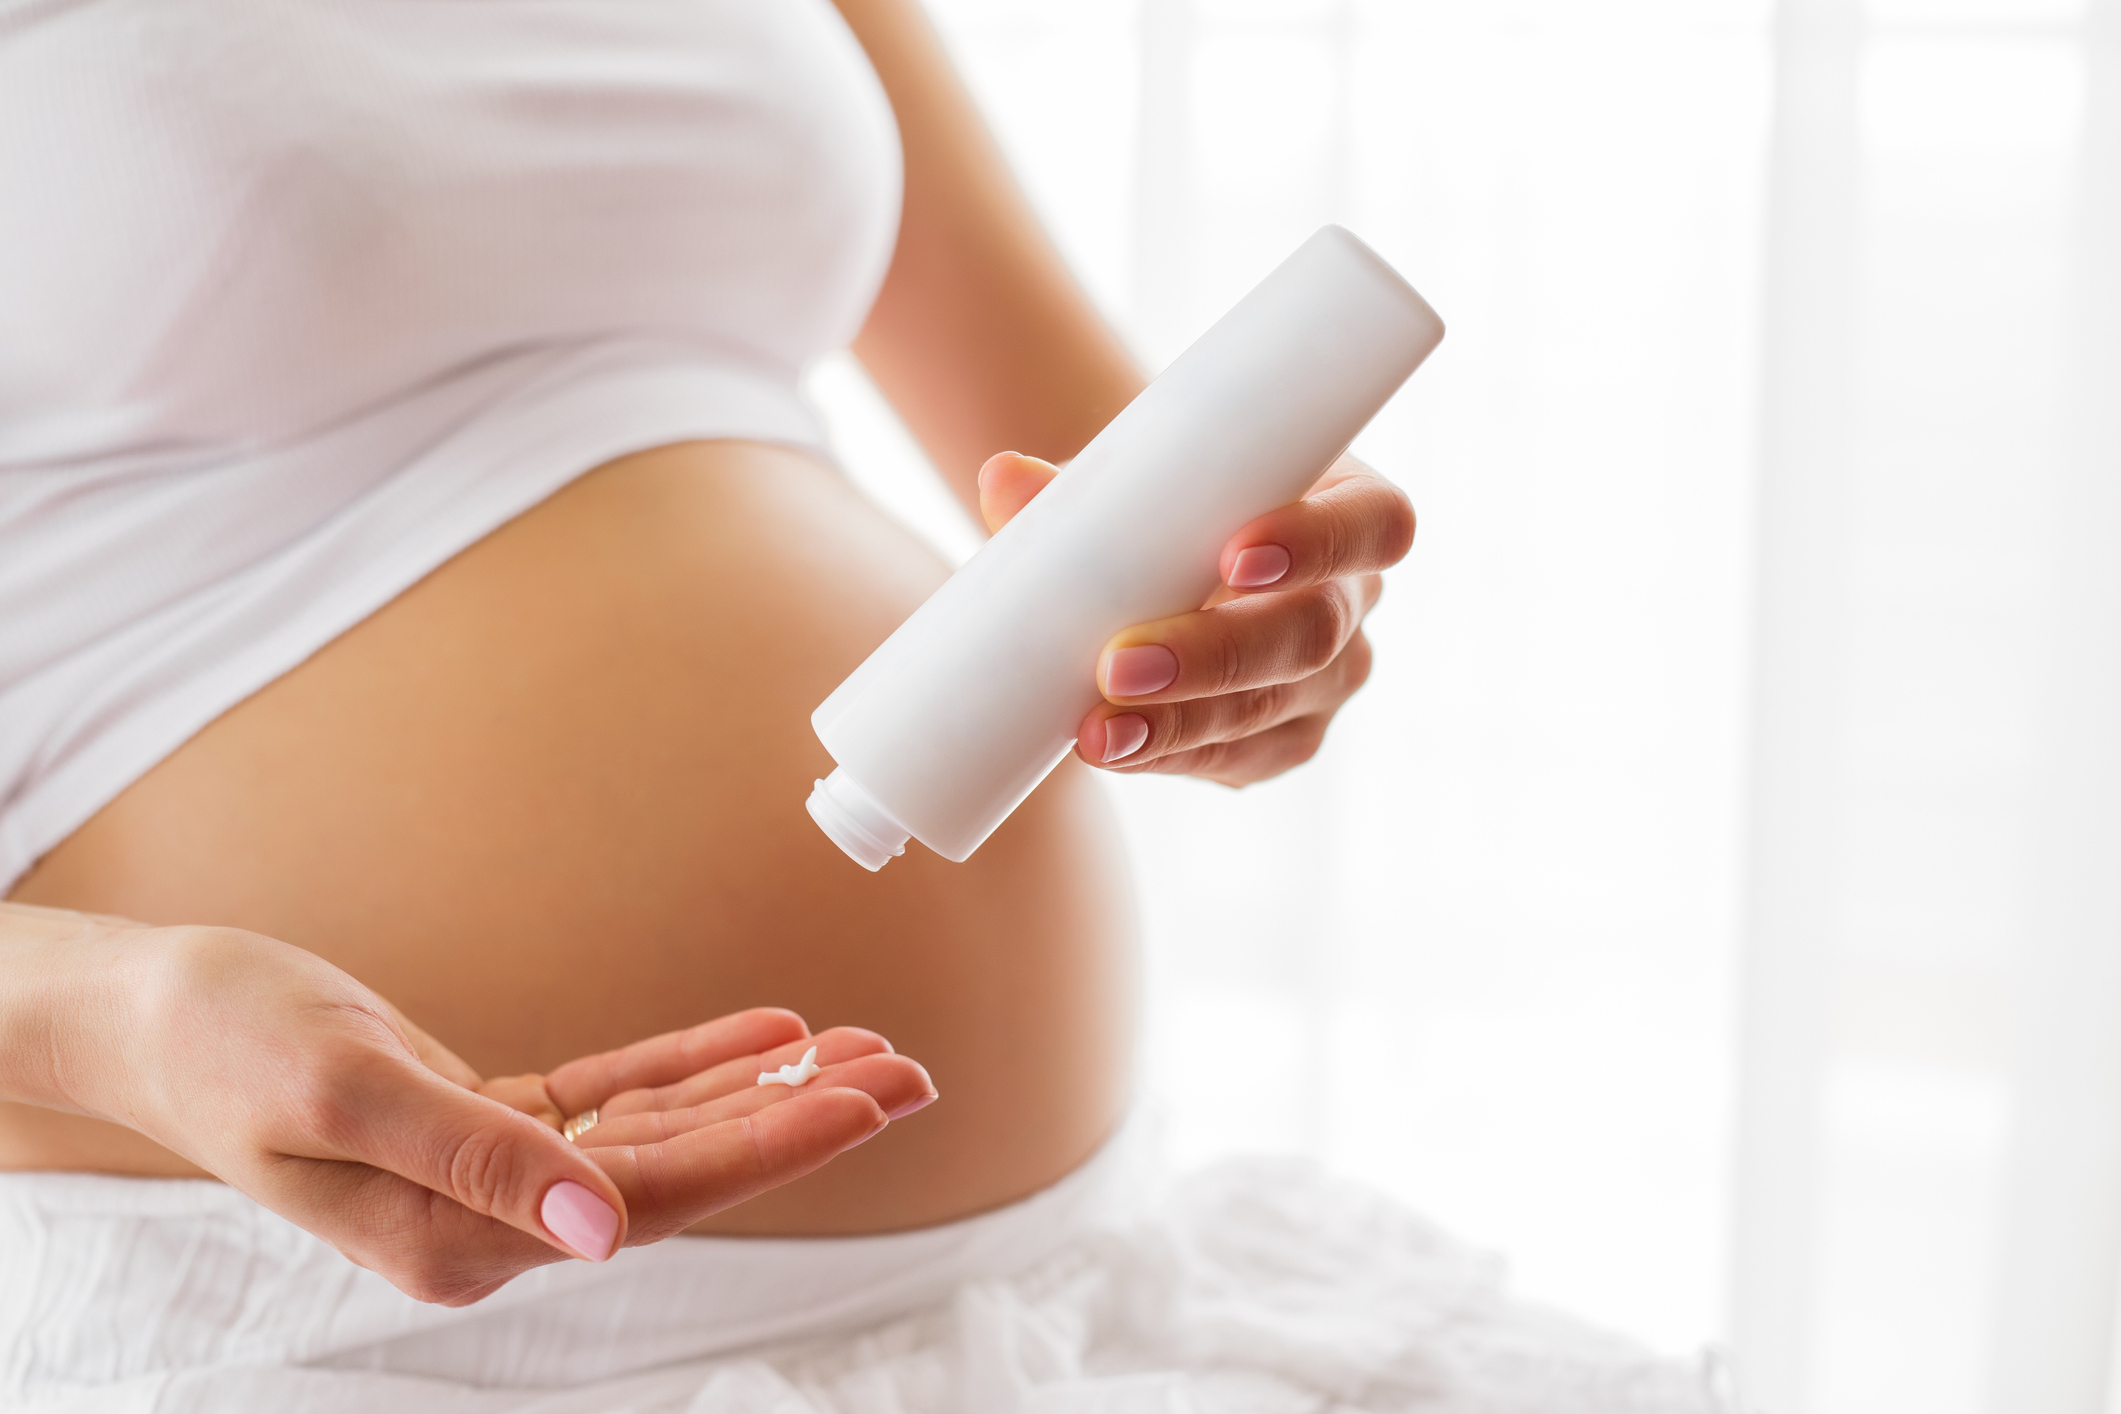 Pregnancy-Safe Skincare Products: What To Buy & What To Avoid